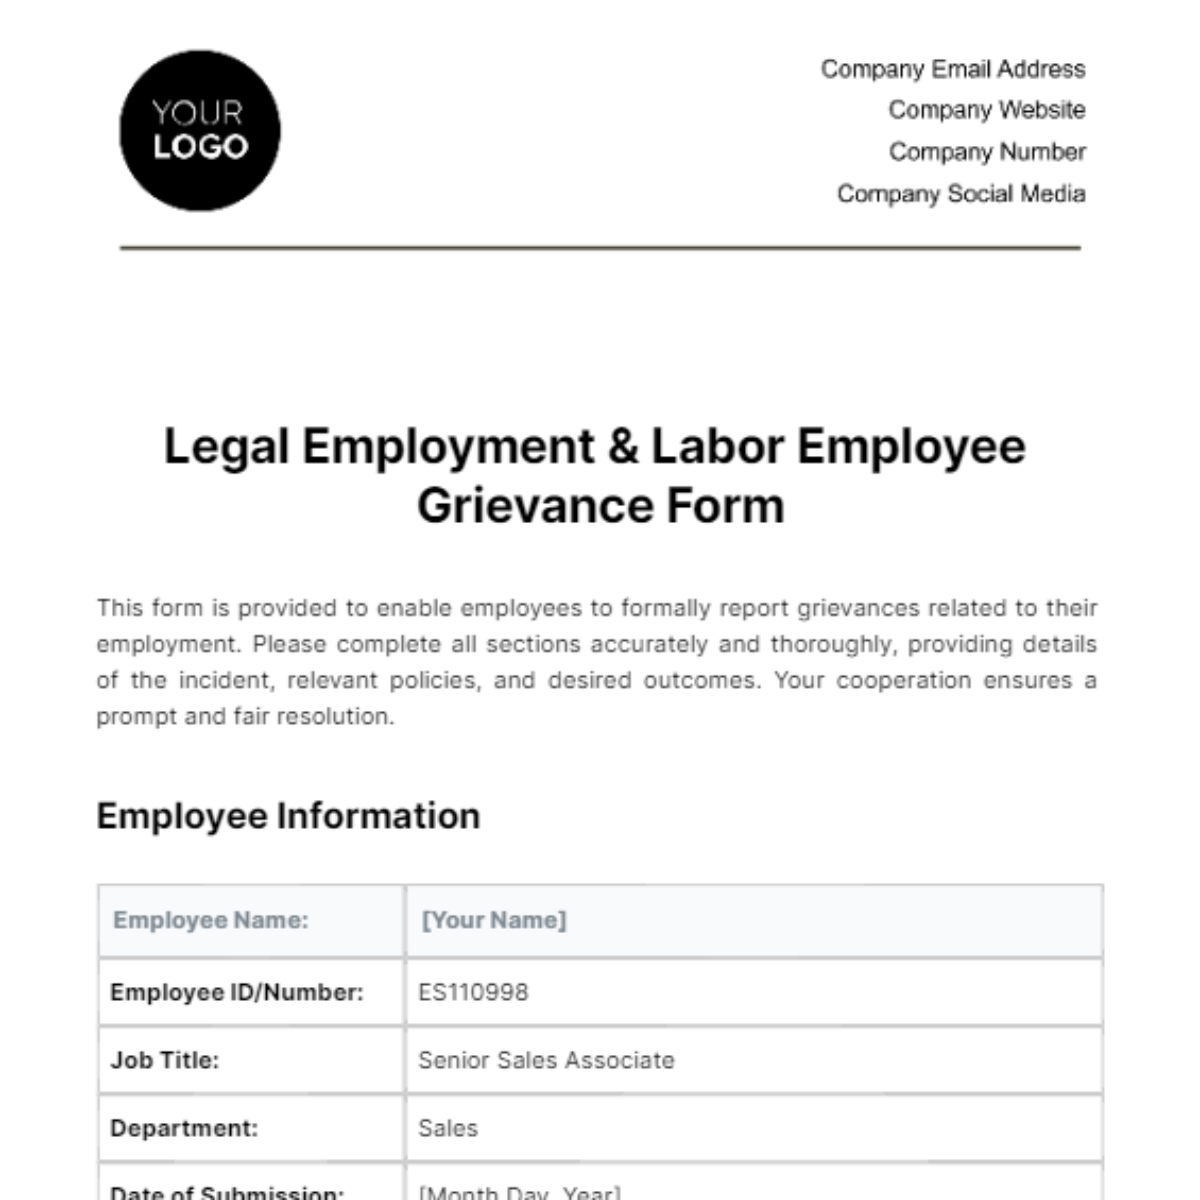 Free Legal Employment & Labor Employee Grievance Form Template